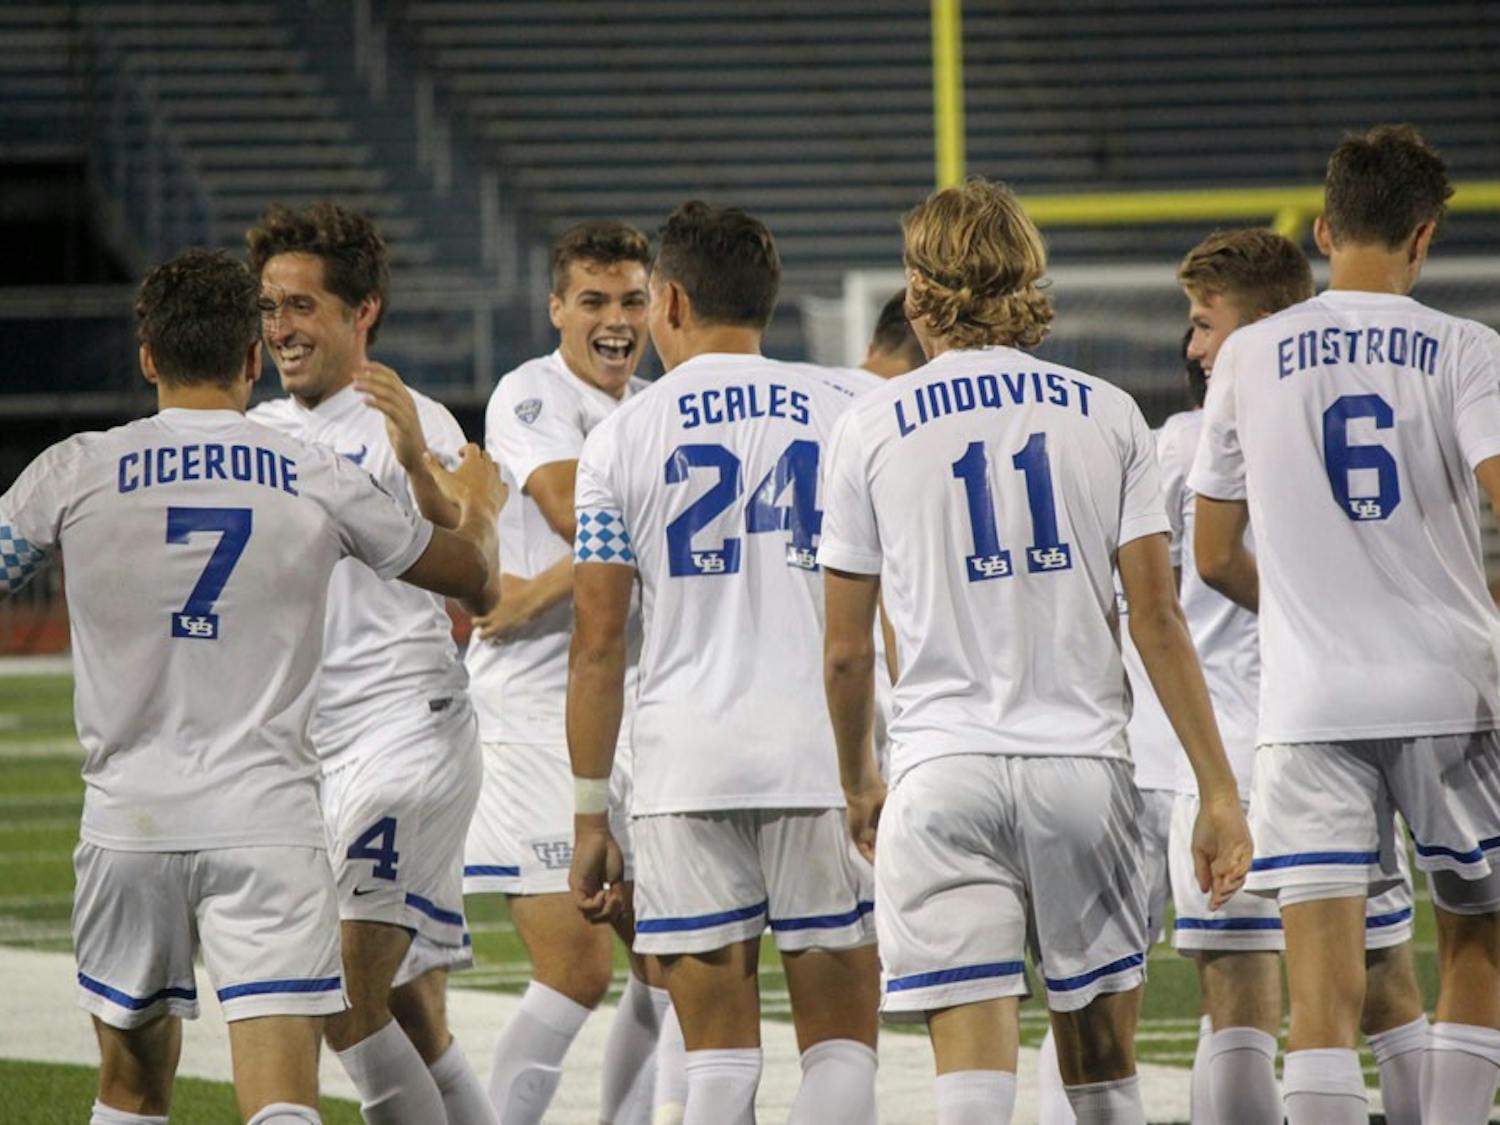 UB men's soccer team celebrates after a win. The men's soccer team will be cut from UB Athletics starting fall 2017.&nbsp;